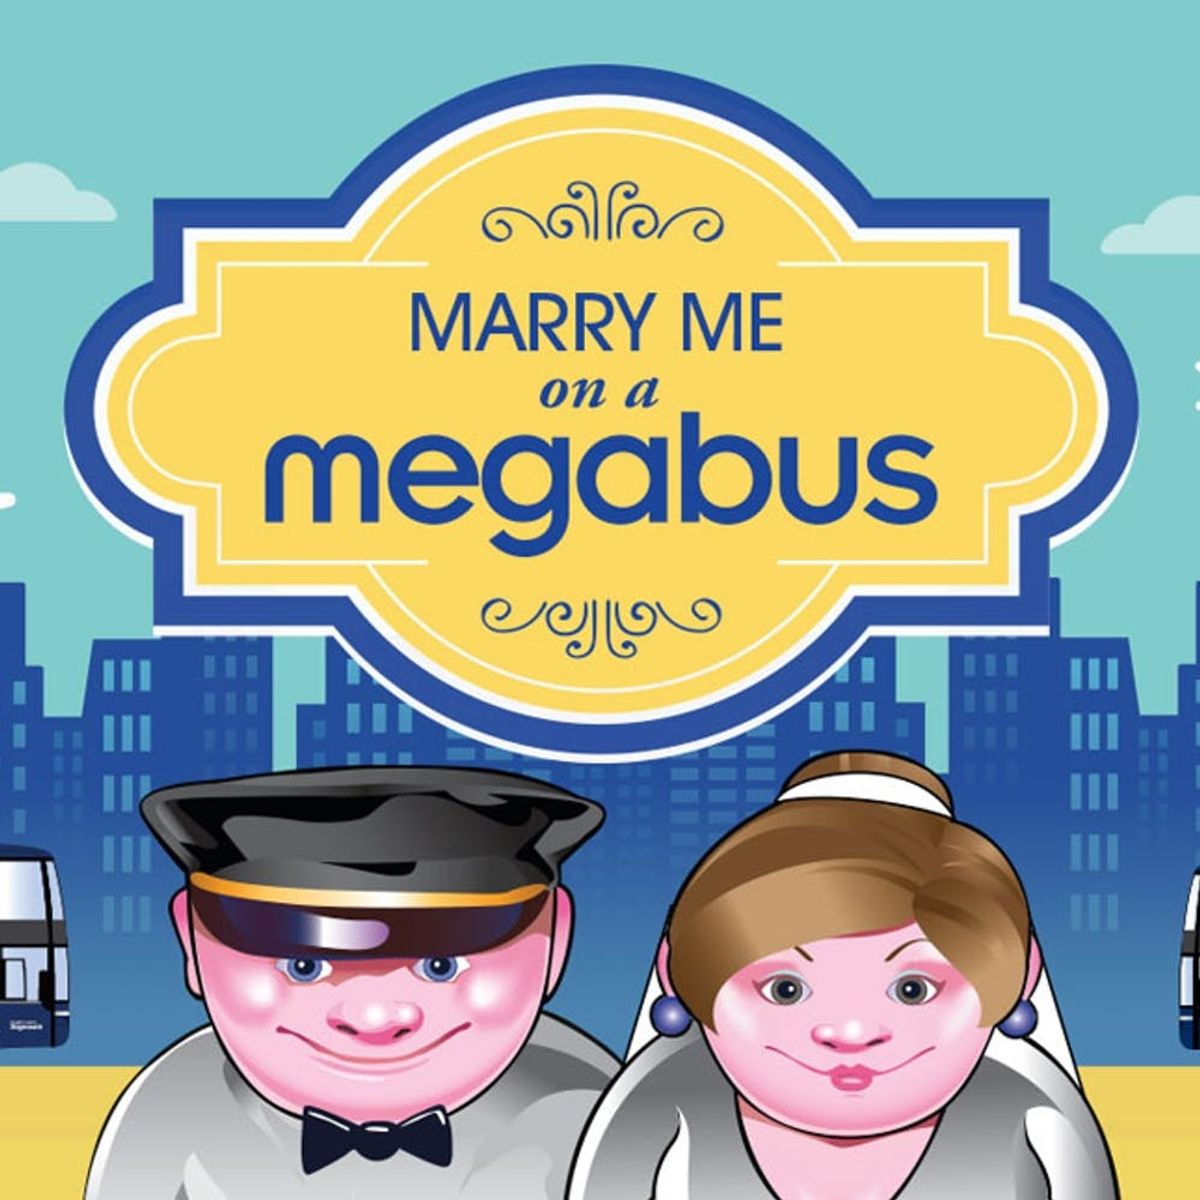 You Can Now Enter to Get Married (Yes, Married!) on a Megabus